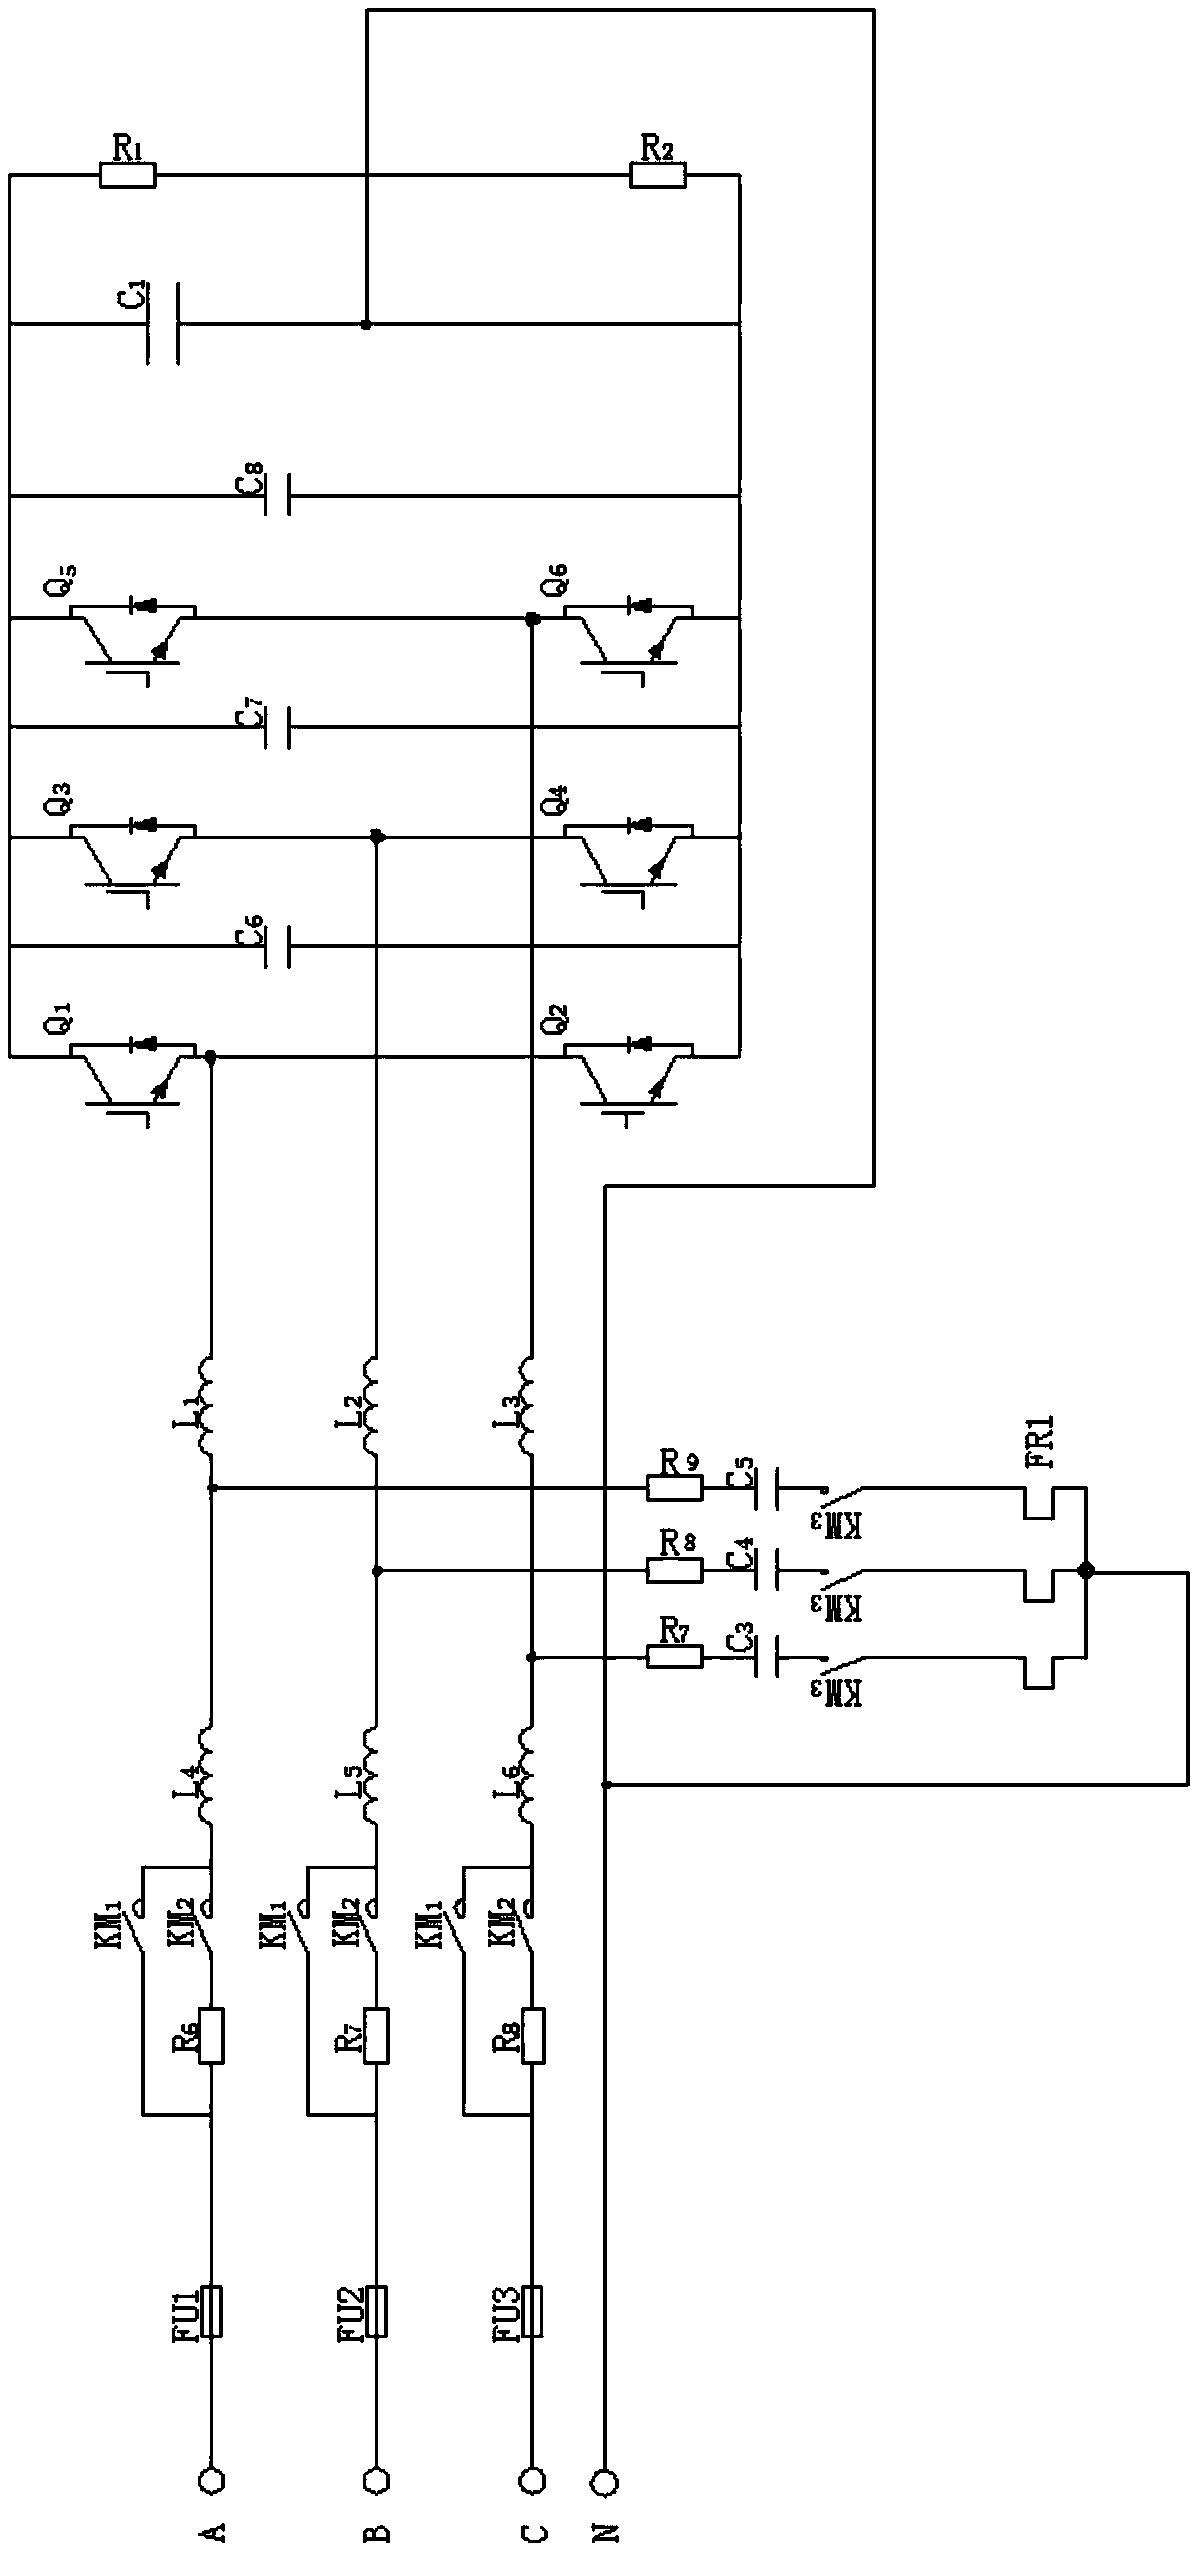 Active filtering circuit for preventing harmonic of 400V power distribution system in plant